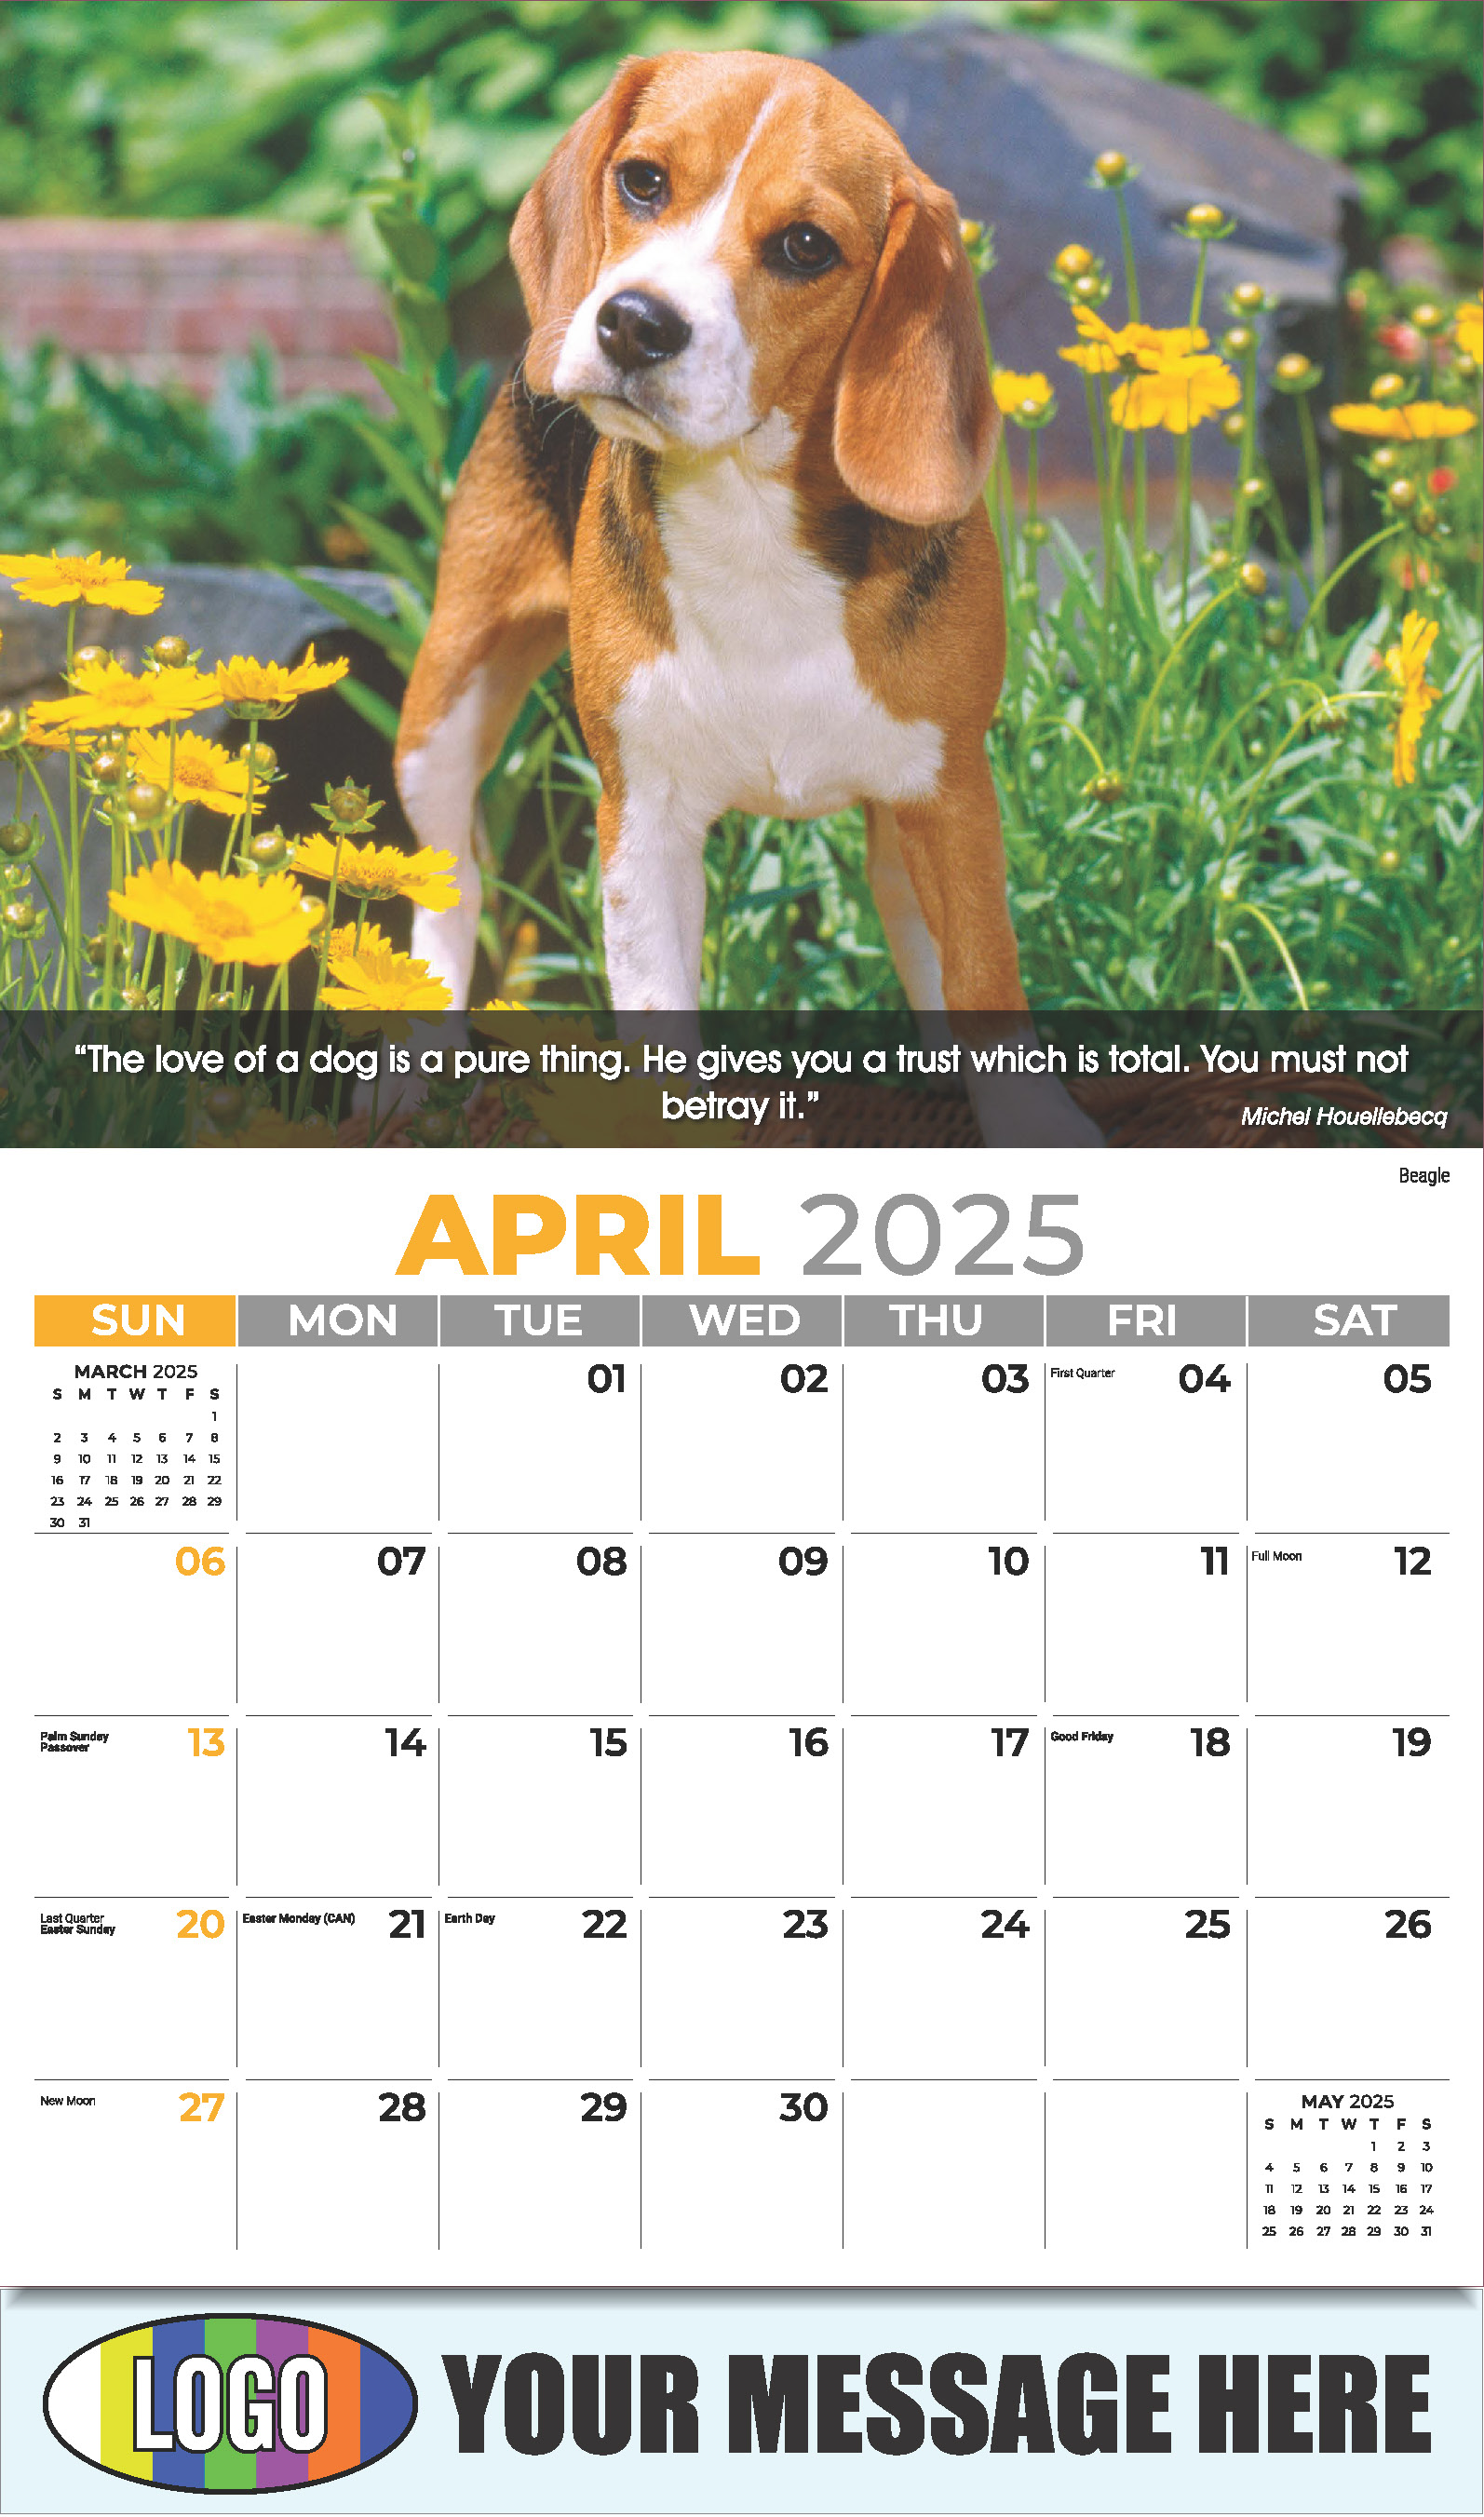 Dogs 2025 Vets and Pets Business Promotion Calendar - April